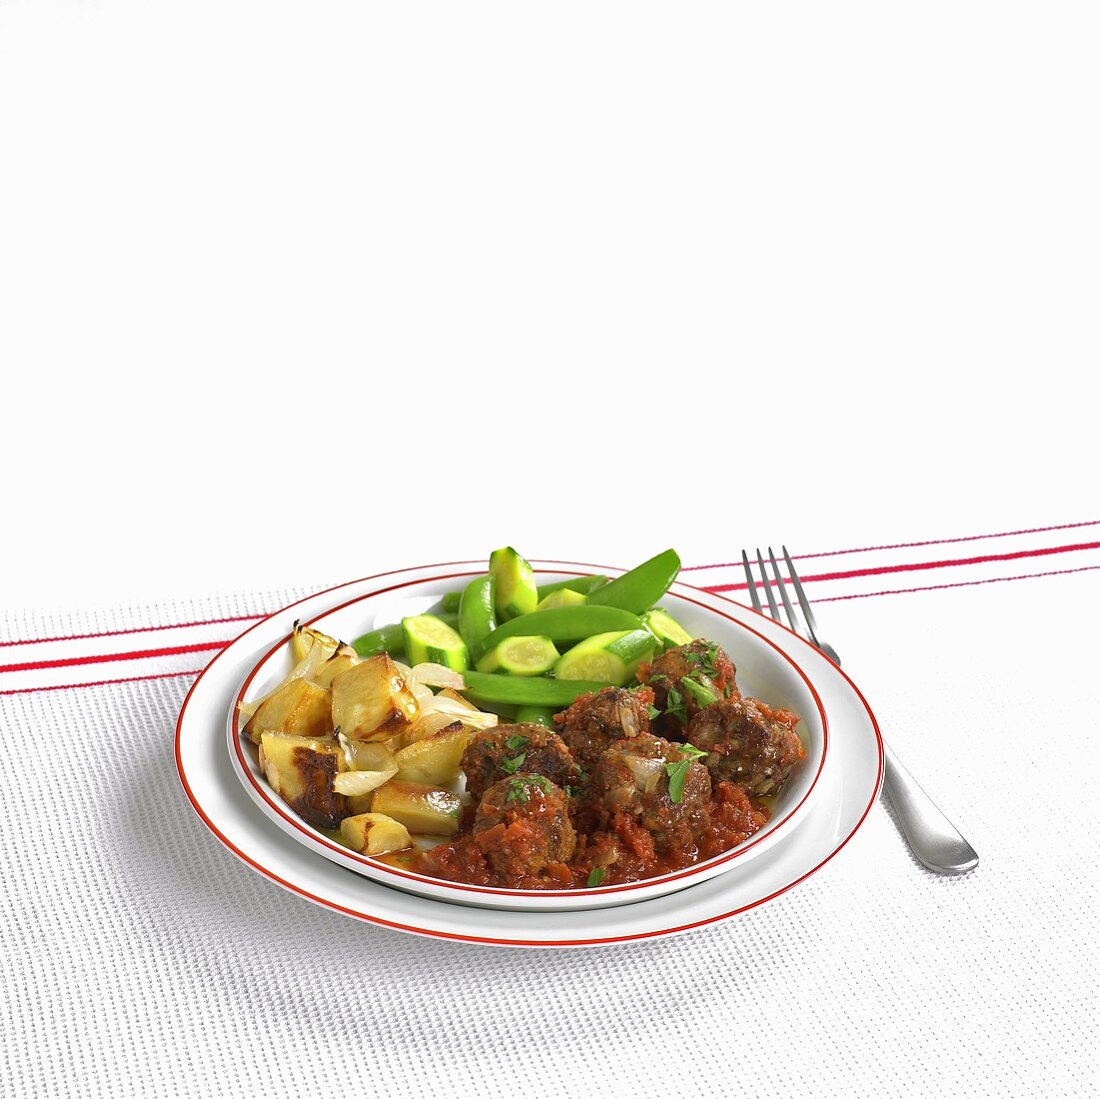 Meatballs with tomato sauce and vegetables